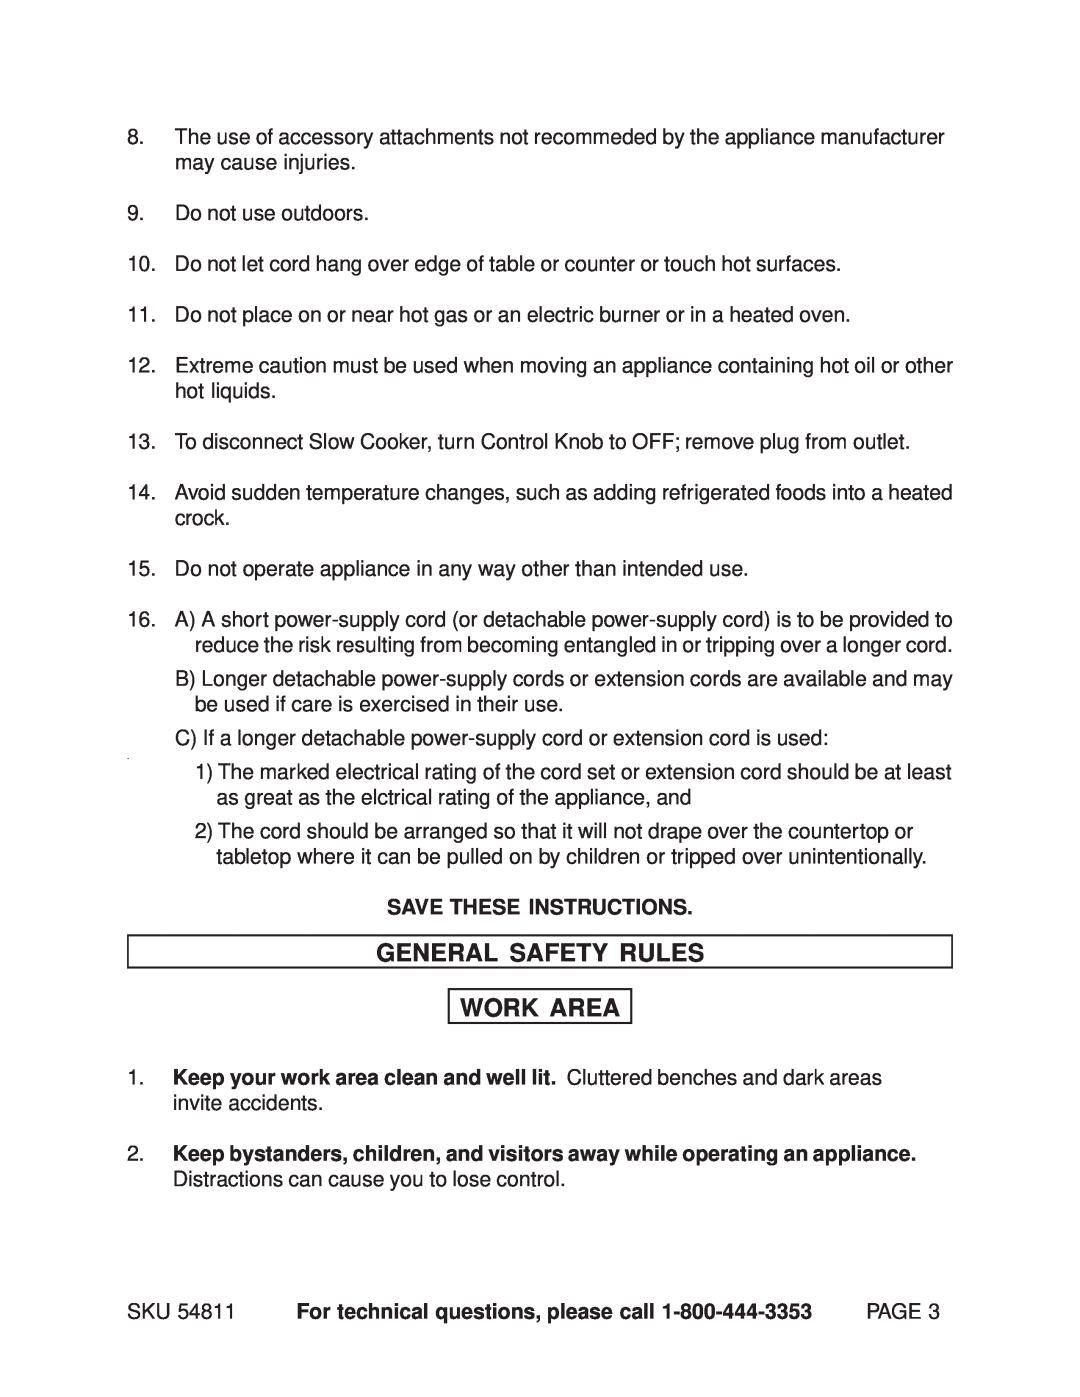 Chicago Electric 54811 manual General Safety Rules Work Area, Save These Instructions, For technical questions, please call 